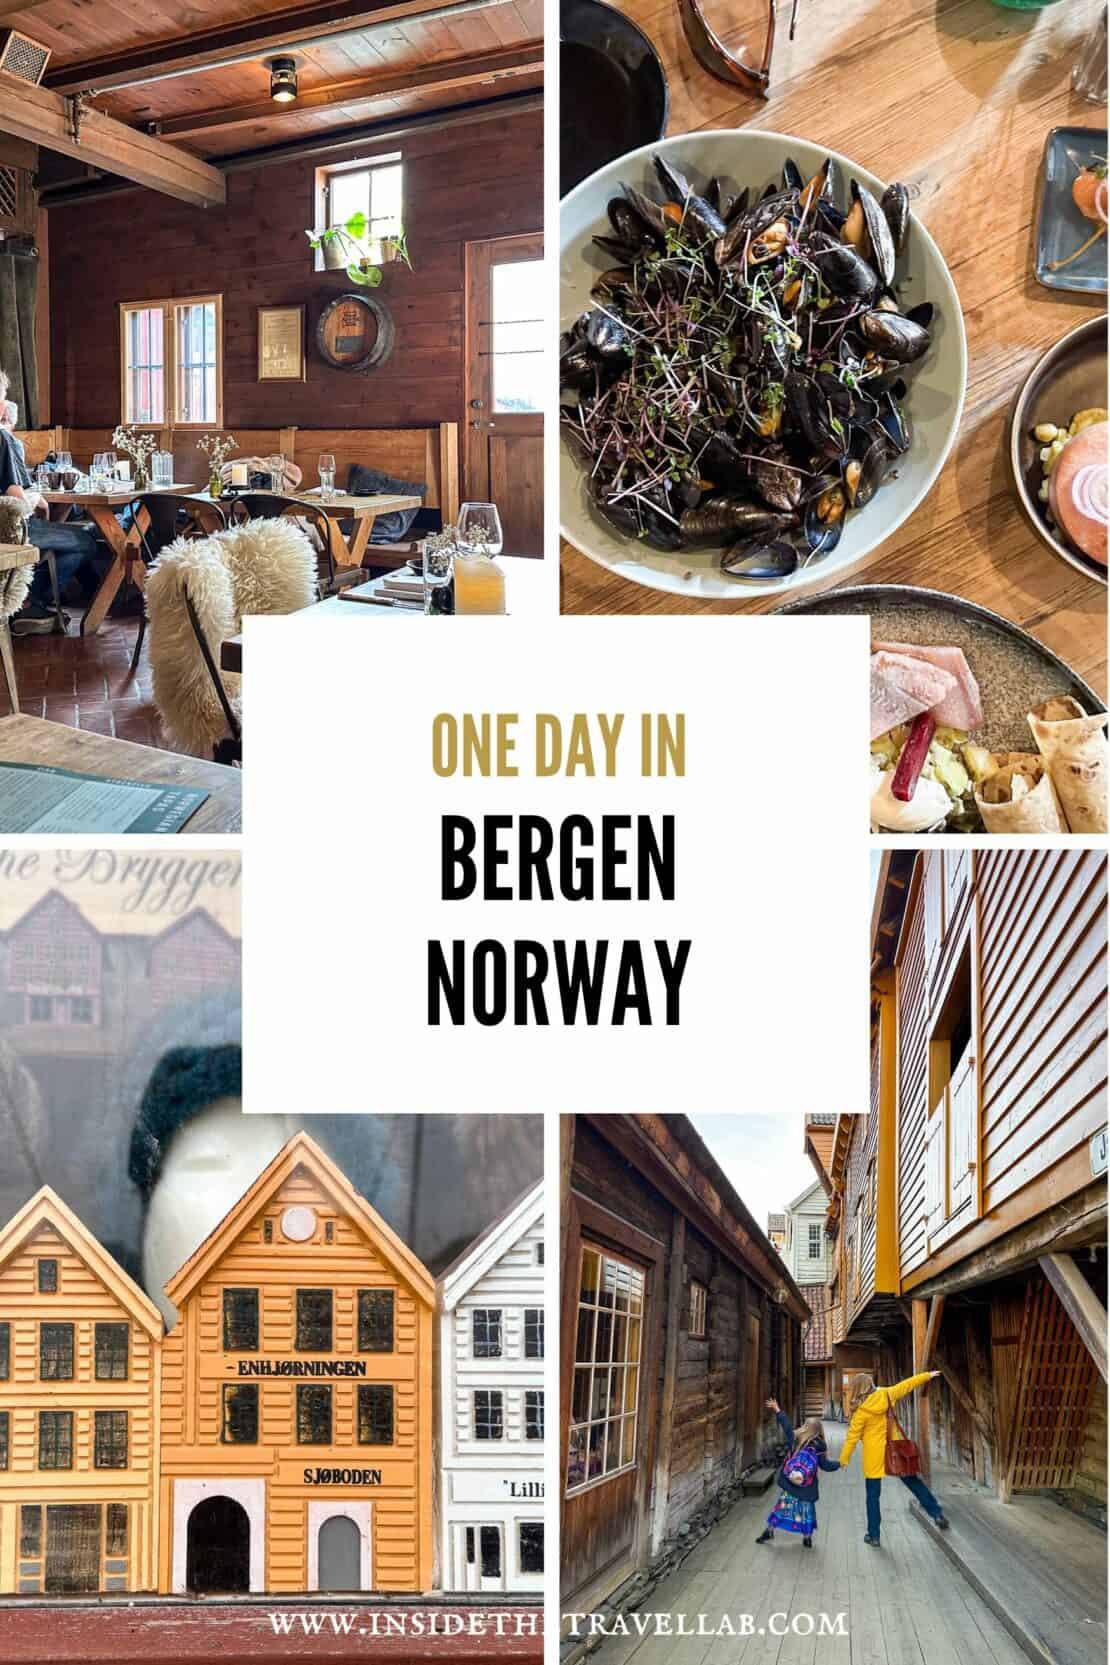 One day in Bergen Norway cover image